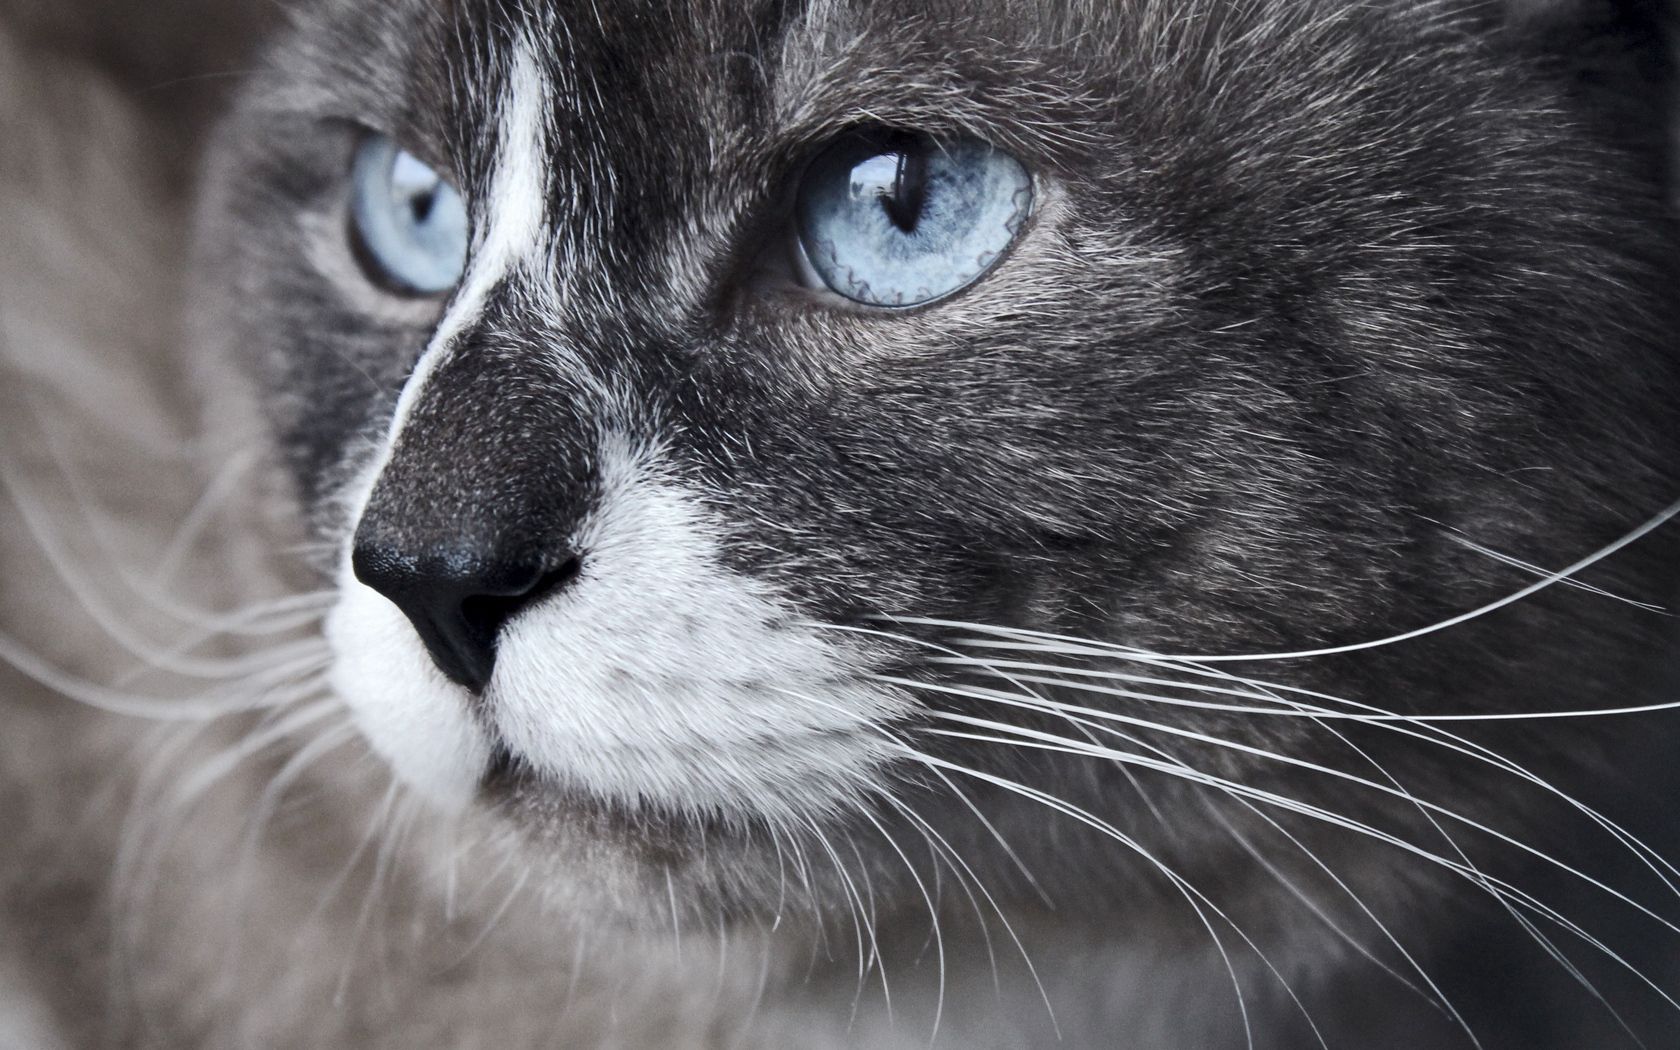 animals, cat, muzzle, close up, sight, opinion, blue eyed, observation